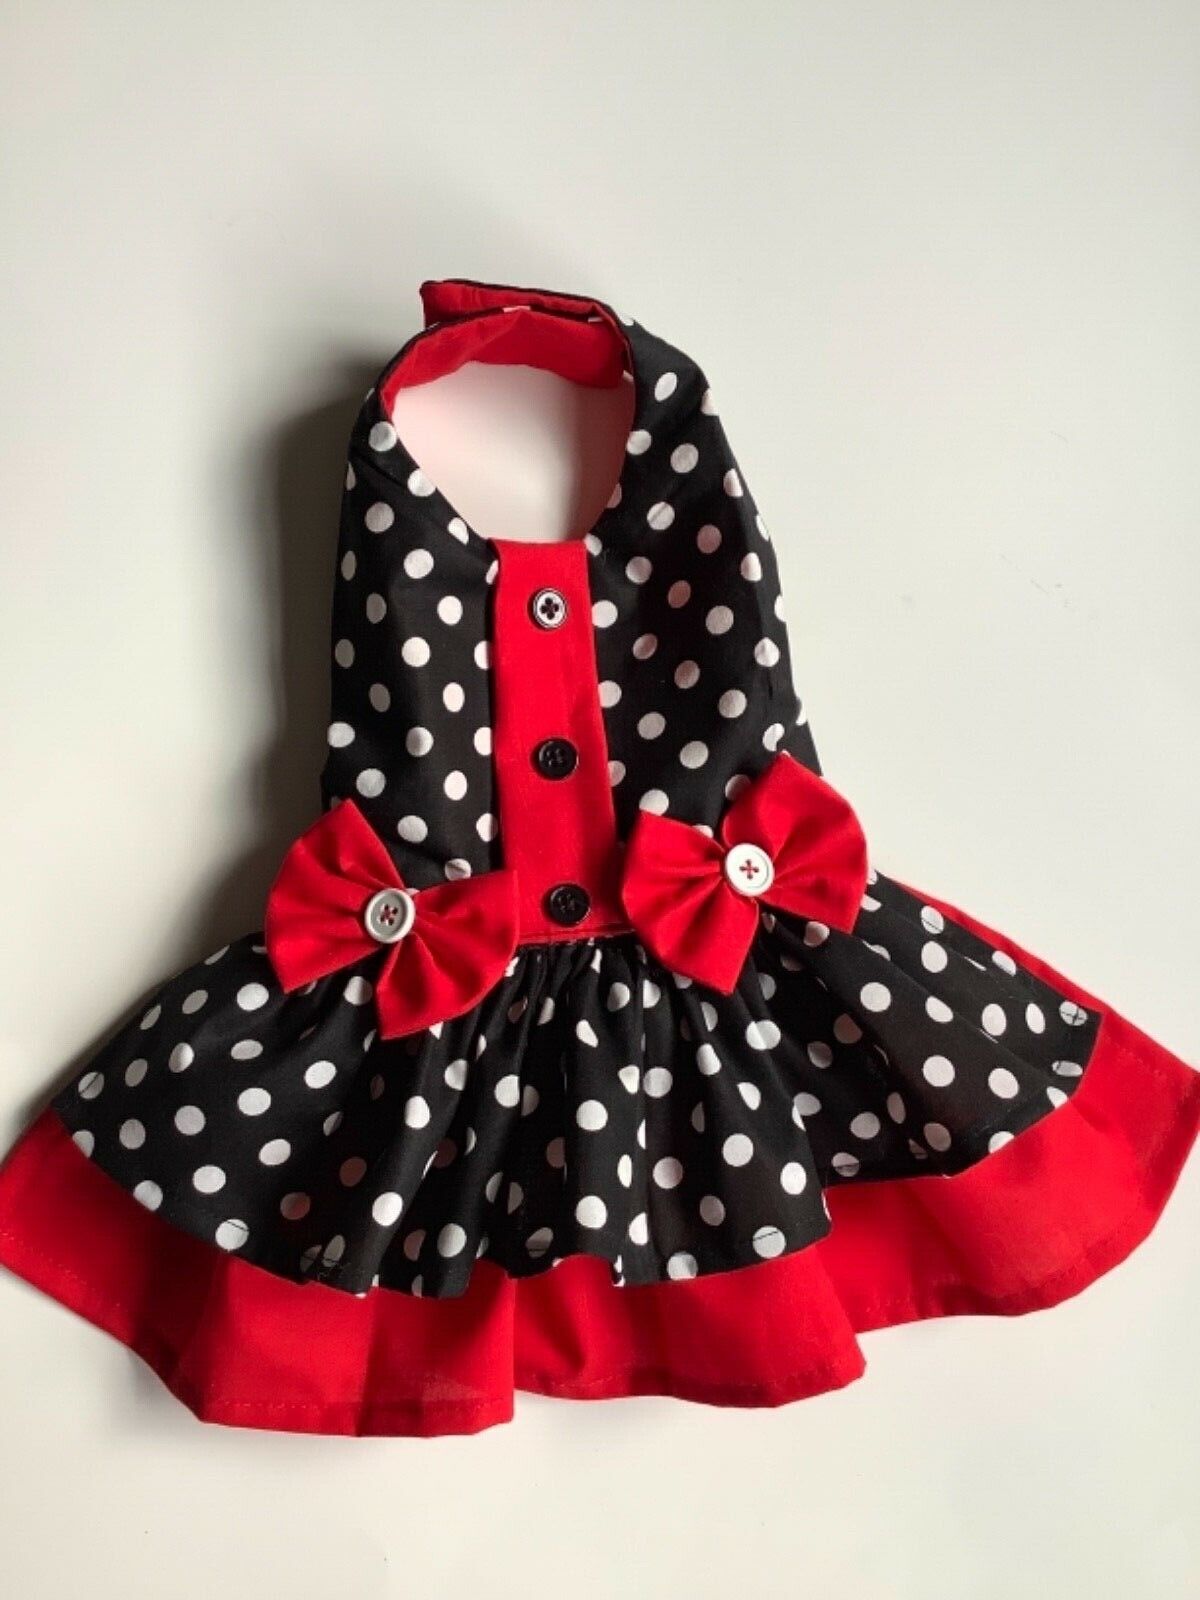 Handmade red and black polka dots doggie 🐶 dress 👗 size Small